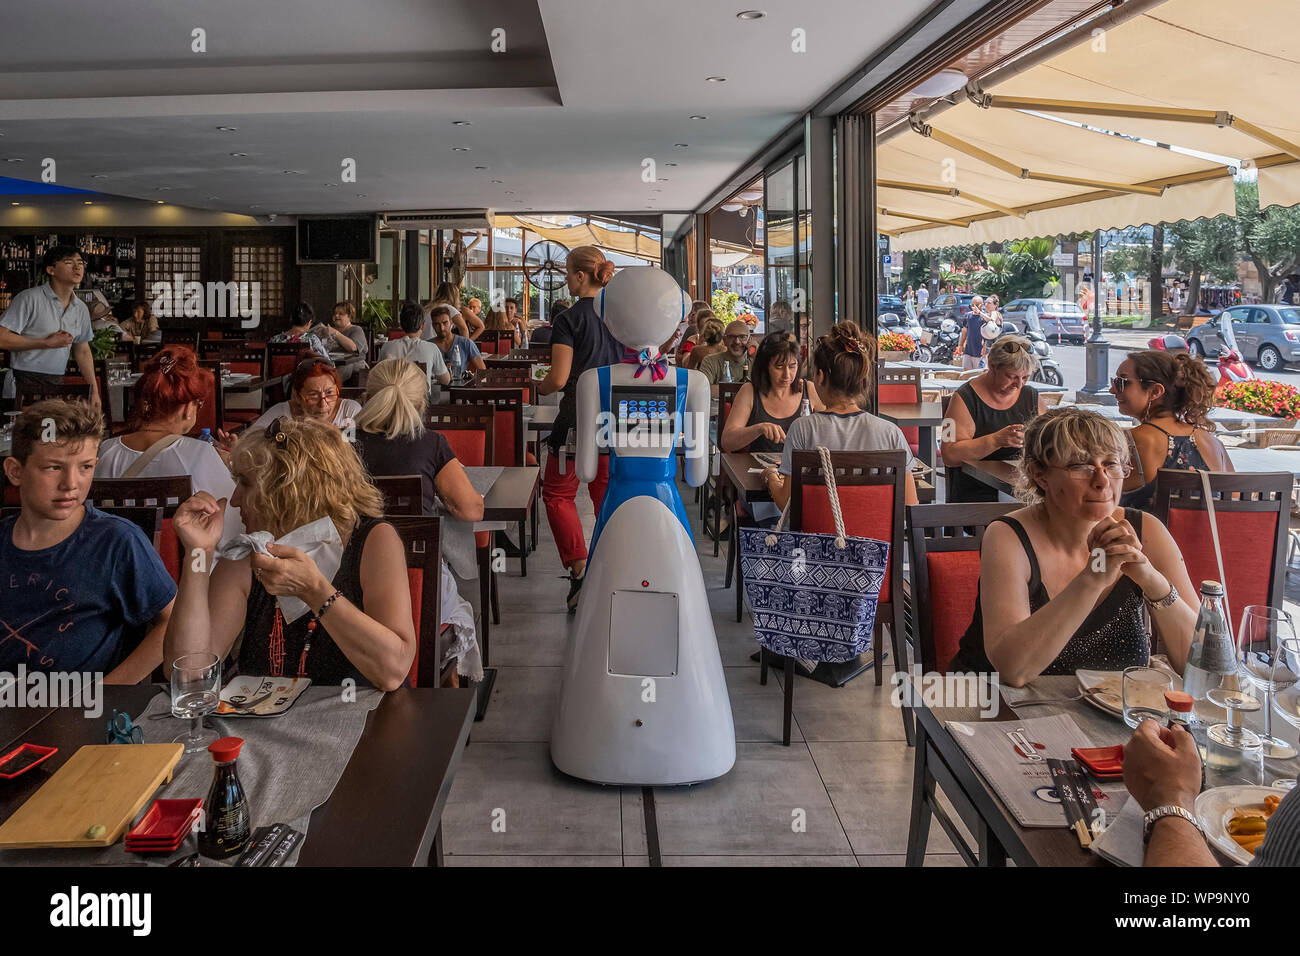 RAPALLO, ITALY - JULY 25: Waiter robot brings the dishes on July 25, 2019 in Rapallo, Italy. The 'Gran Caff Rapallo' restaurant in Liguria is the fir Stock Photo